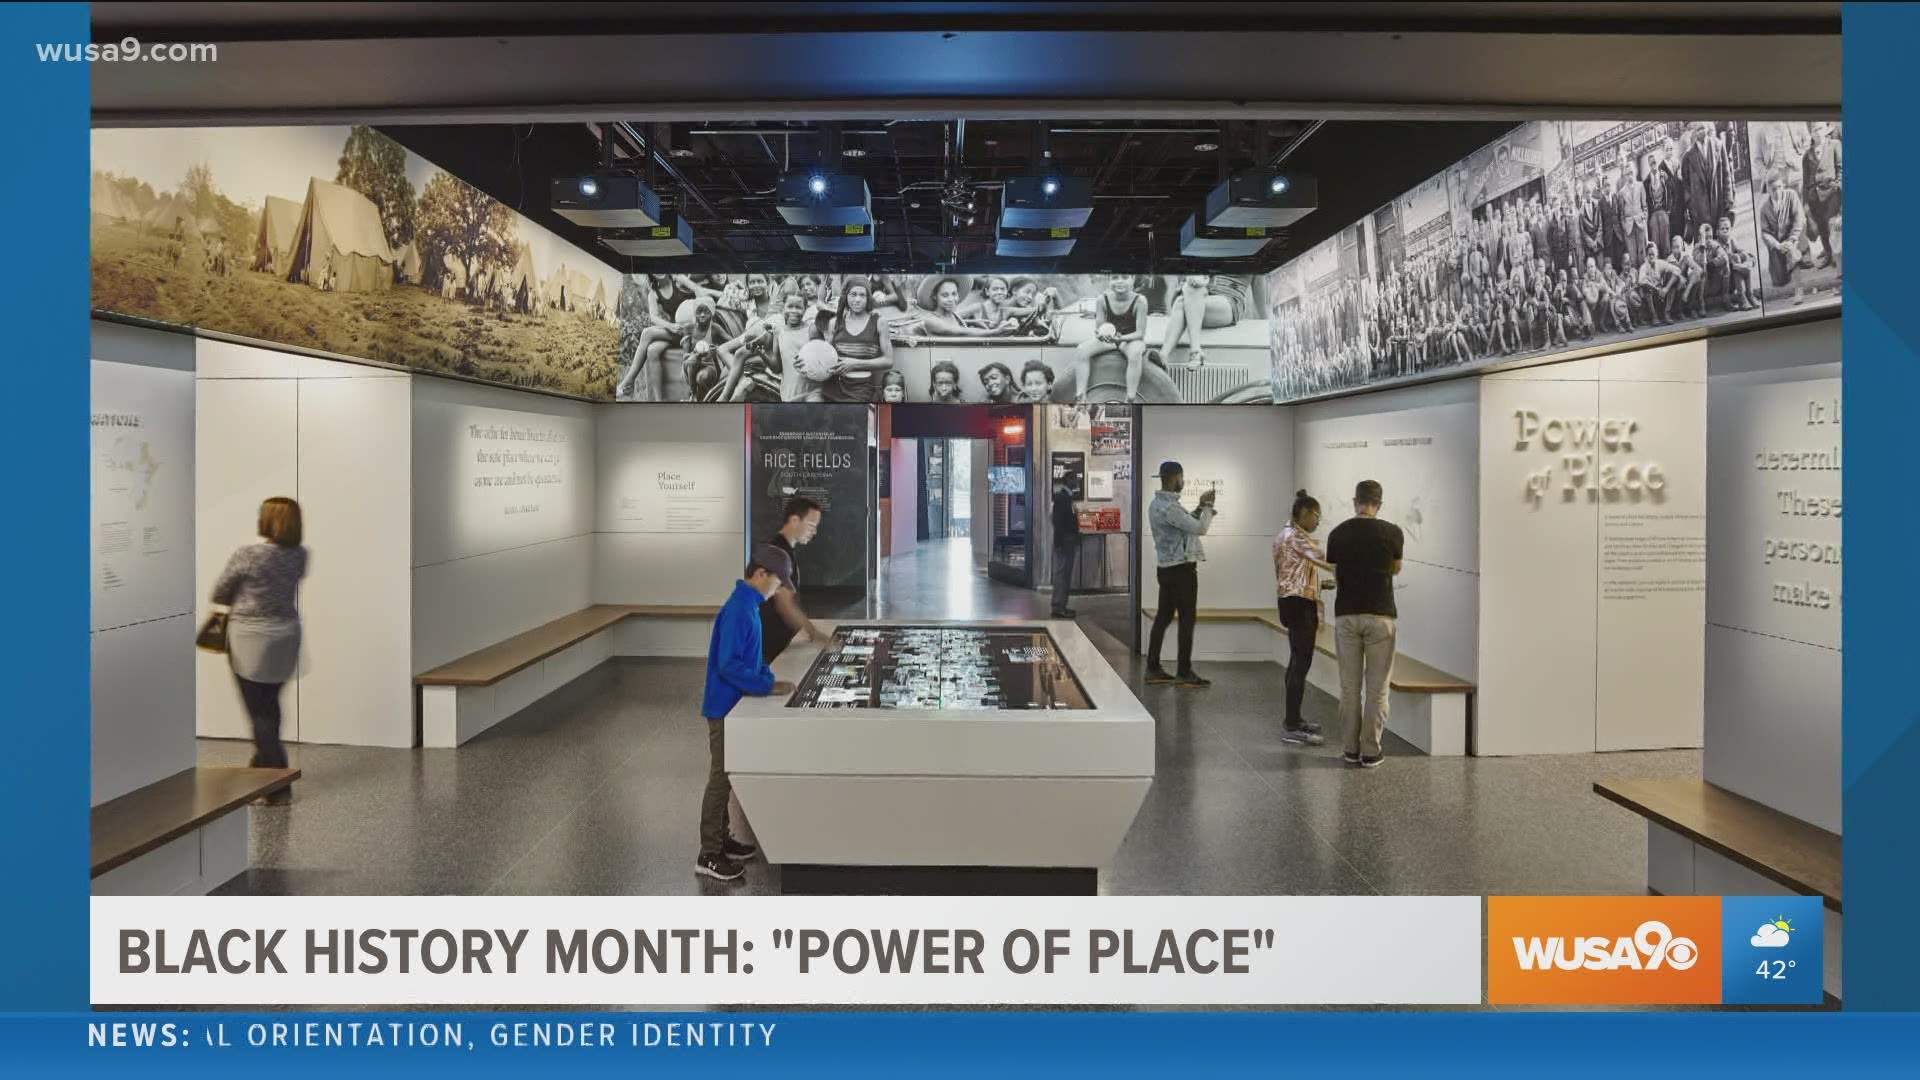 MNAAHC curator Paul Gardullo explains how to experience Black history 24/7 365 days a year.